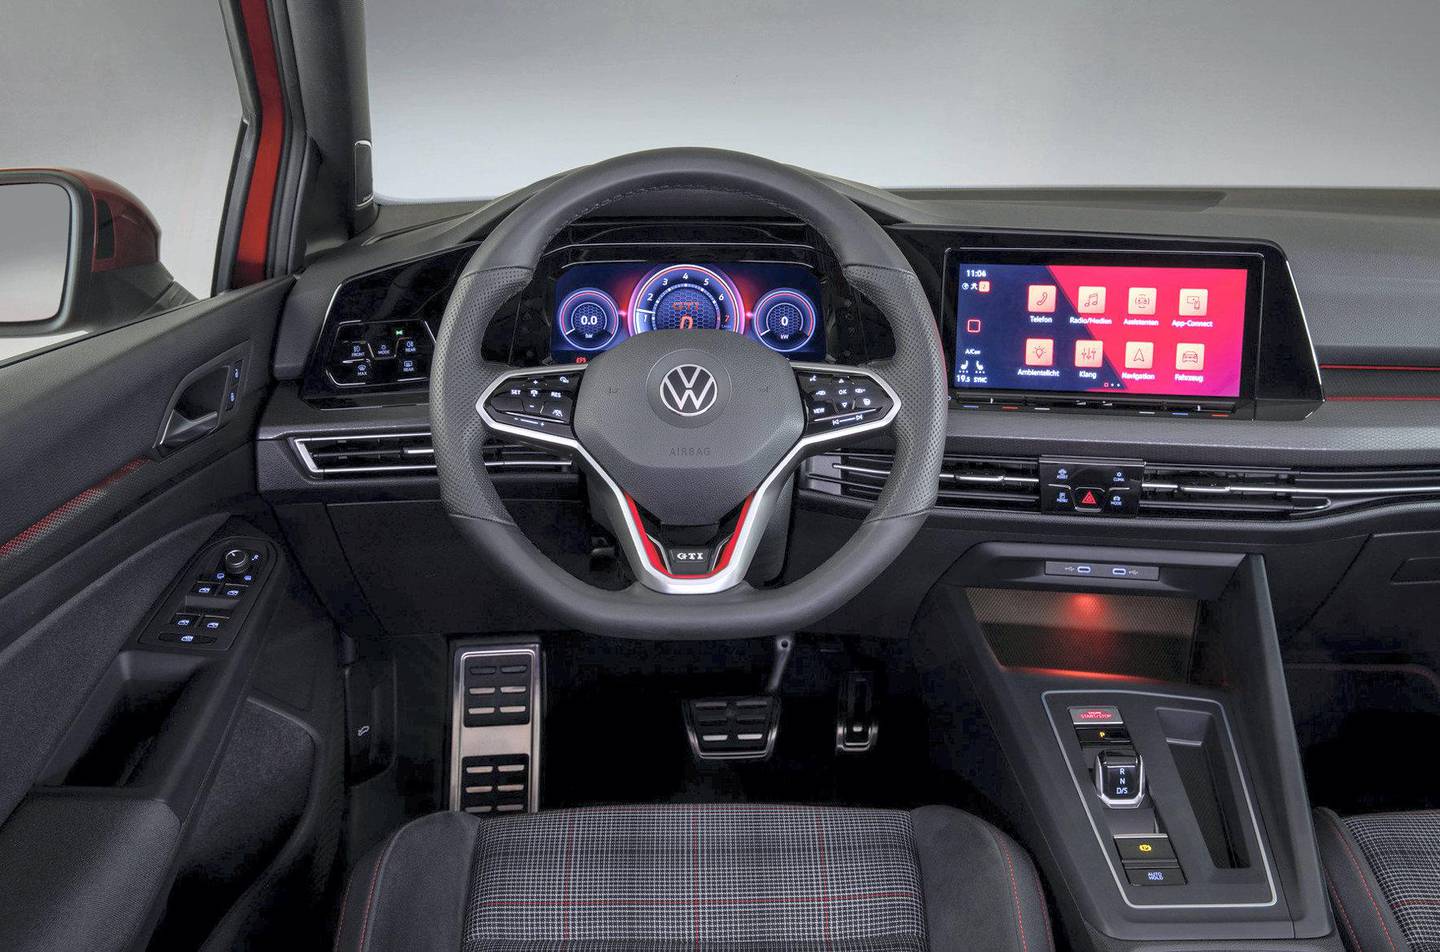 The cabin houses a new infotainment system and a digital dash.